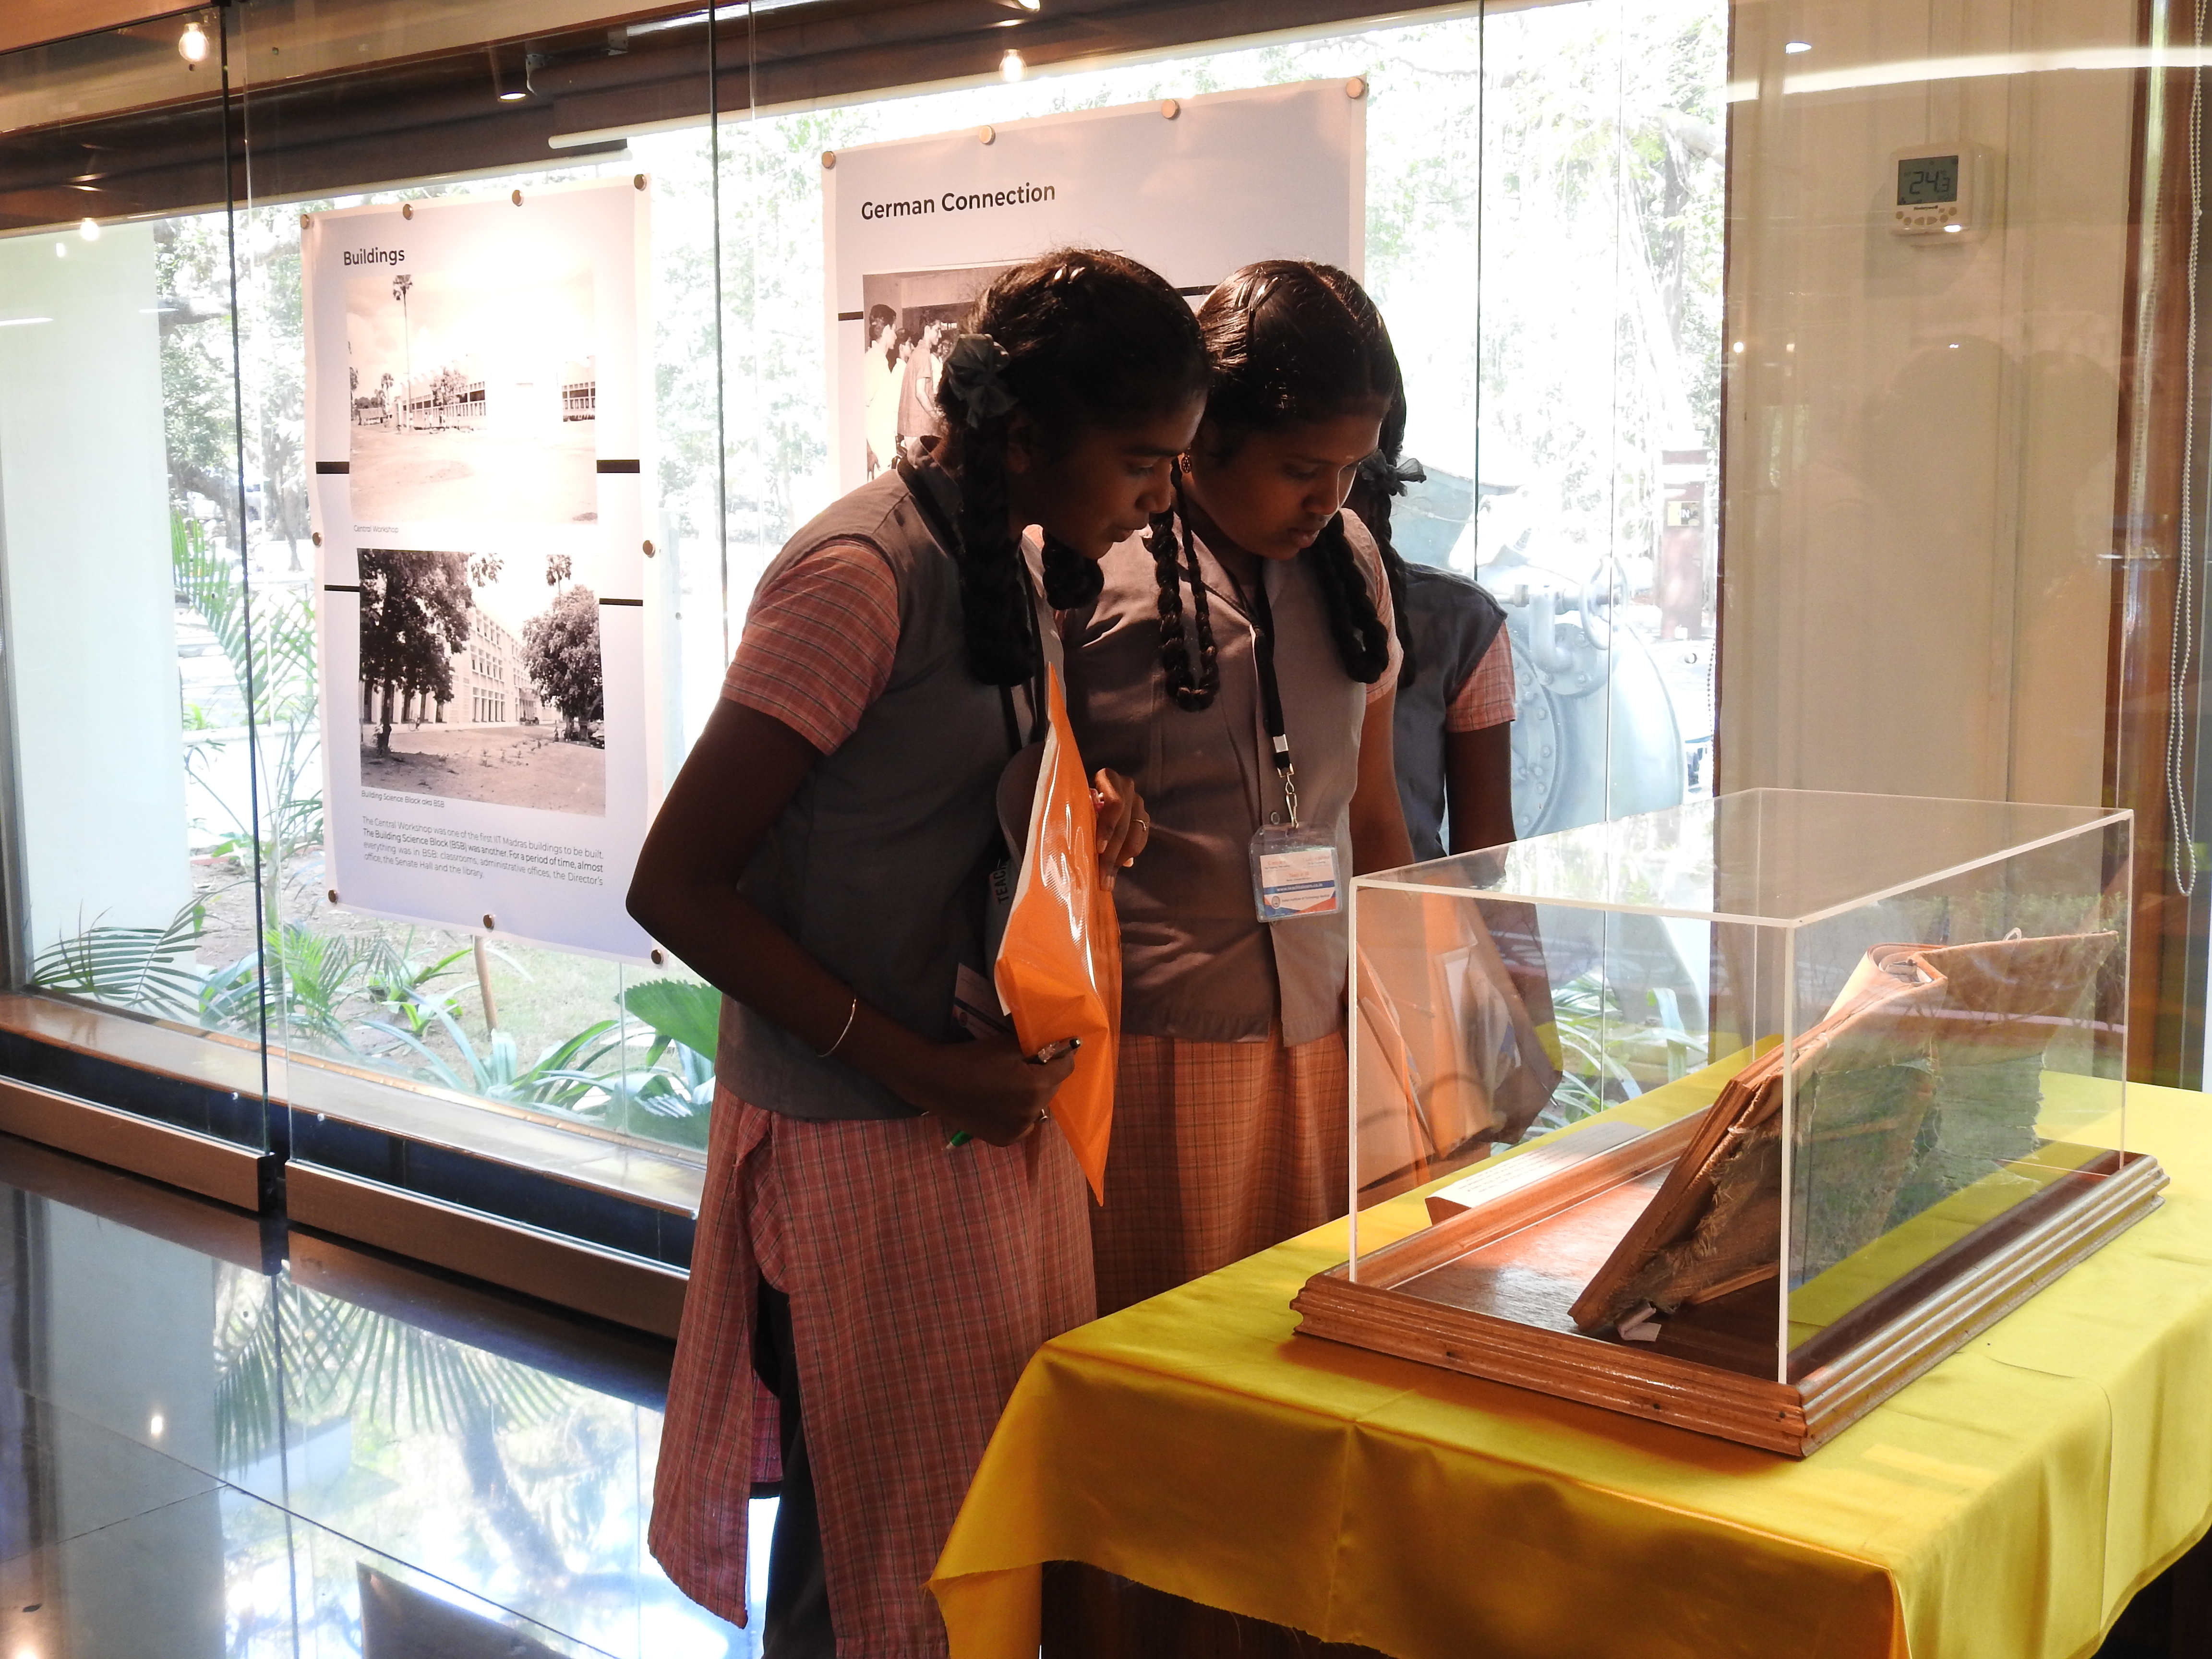 Students discuss an exhibit at the Heritage Centre